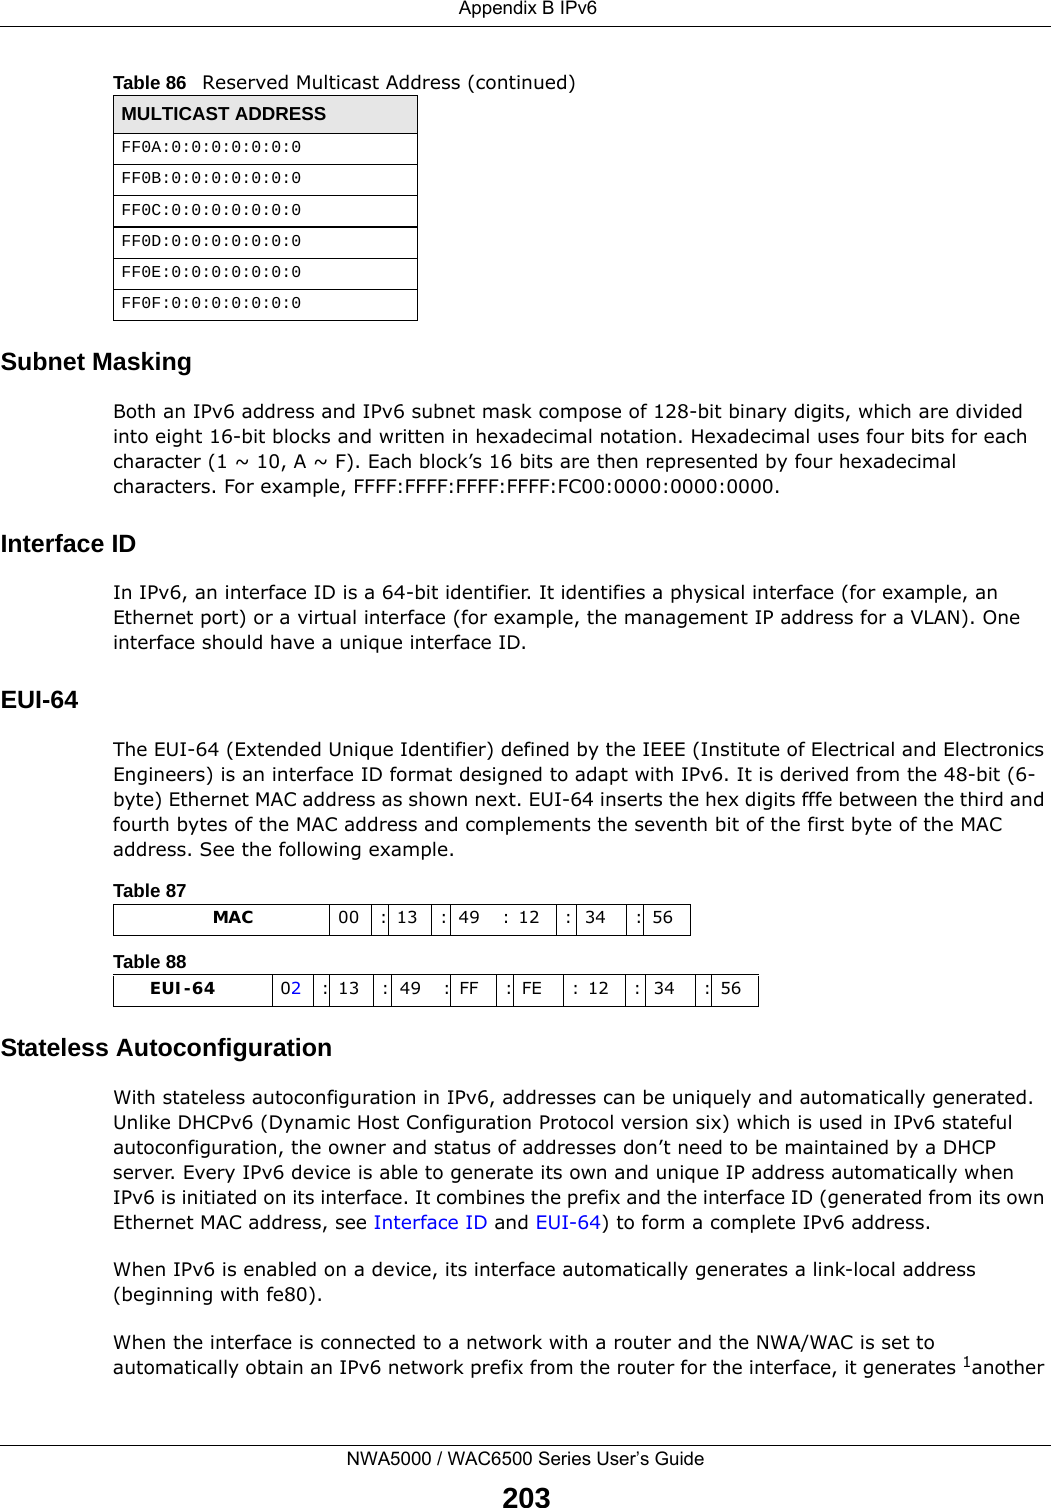  Appendix B IPv6NWA5000 / WAC6500 Series User’s Guide203Subnet MaskingBoth an IPv6 address and IPv6 subnet mask compose of 128-bit binary digits, which are divided into eight 16-bit blocks and written in hexadecimal notation. Hexadecimal uses four bits for each character (1 ~ 10, A ~ F). Each block’s 16 bits are then represented by four hexadecimal characters. For example, FFFF:FFFF:FFFF:FFFF:FC00:0000:0000:0000.Interface IDIn IPv6, an interface ID is a 64-bit identifier. It identifies a physical interface (for example, an Ethernet port) or a virtual interface (for example, the management IP address for a VLAN). One interface should have a unique interface ID.EUI-64The EUI-64 (Extended Unique Identifier) defined by the IEEE (Institute of Electrical and Electronics Engineers) is an interface ID format designed to adapt with IPv6. It is derived from the 48-bit (6-byte) Ethernet MAC address as shown next. EUI-64 inserts the hex digits fffe between the third and fourth bytes of the MAC address and complements the seventh bit of the first byte of the MAC address. See the following example. Stateless AutoconfigurationWith stateless autoconfiguration in IPv6, addresses can be uniquely and automatically generated. Unlike DHCPv6 (Dynamic Host Configuration Protocol version six) which is used in IPv6 stateful autoconfiguration, the owner and status of addresses don’t need to be maintained by a DHCP server. Every IPv6 device is able to generate its own and unique IP address automatically when IPv6 is initiated on its interface. It combines the prefix and the interface ID (generated from its own Ethernet MAC address, see Interface ID and EUI-64) to form a complete IPv6 address.When IPv6 is enabled on a device, its interface automatically generates a link-local address (beginning with fe80).When the interface is connected to a network with a router and the NWA/WAC is set to automatically obtain an IPv6 network prefix from the router for the interface, it generates 1another FF0A:0:0:0:0:0:0:0FF0B:0:0:0:0:0:0:0FF0C:0:0:0:0:0:0:0FF0D:0:0:0:0:0:0:0FF0E:0:0:0:0:0:0:0FF0F:0:0:0:0:0:0:0Table 86   Reserved Multicast Address (continued)MULTICAST ADDRESSTable 87                   MAC 00 : 13 : 49 : 12 : 34 : 56Table 88        EUI-64 02: 13 : 49 : FF : FE : 12 : 34 : 56